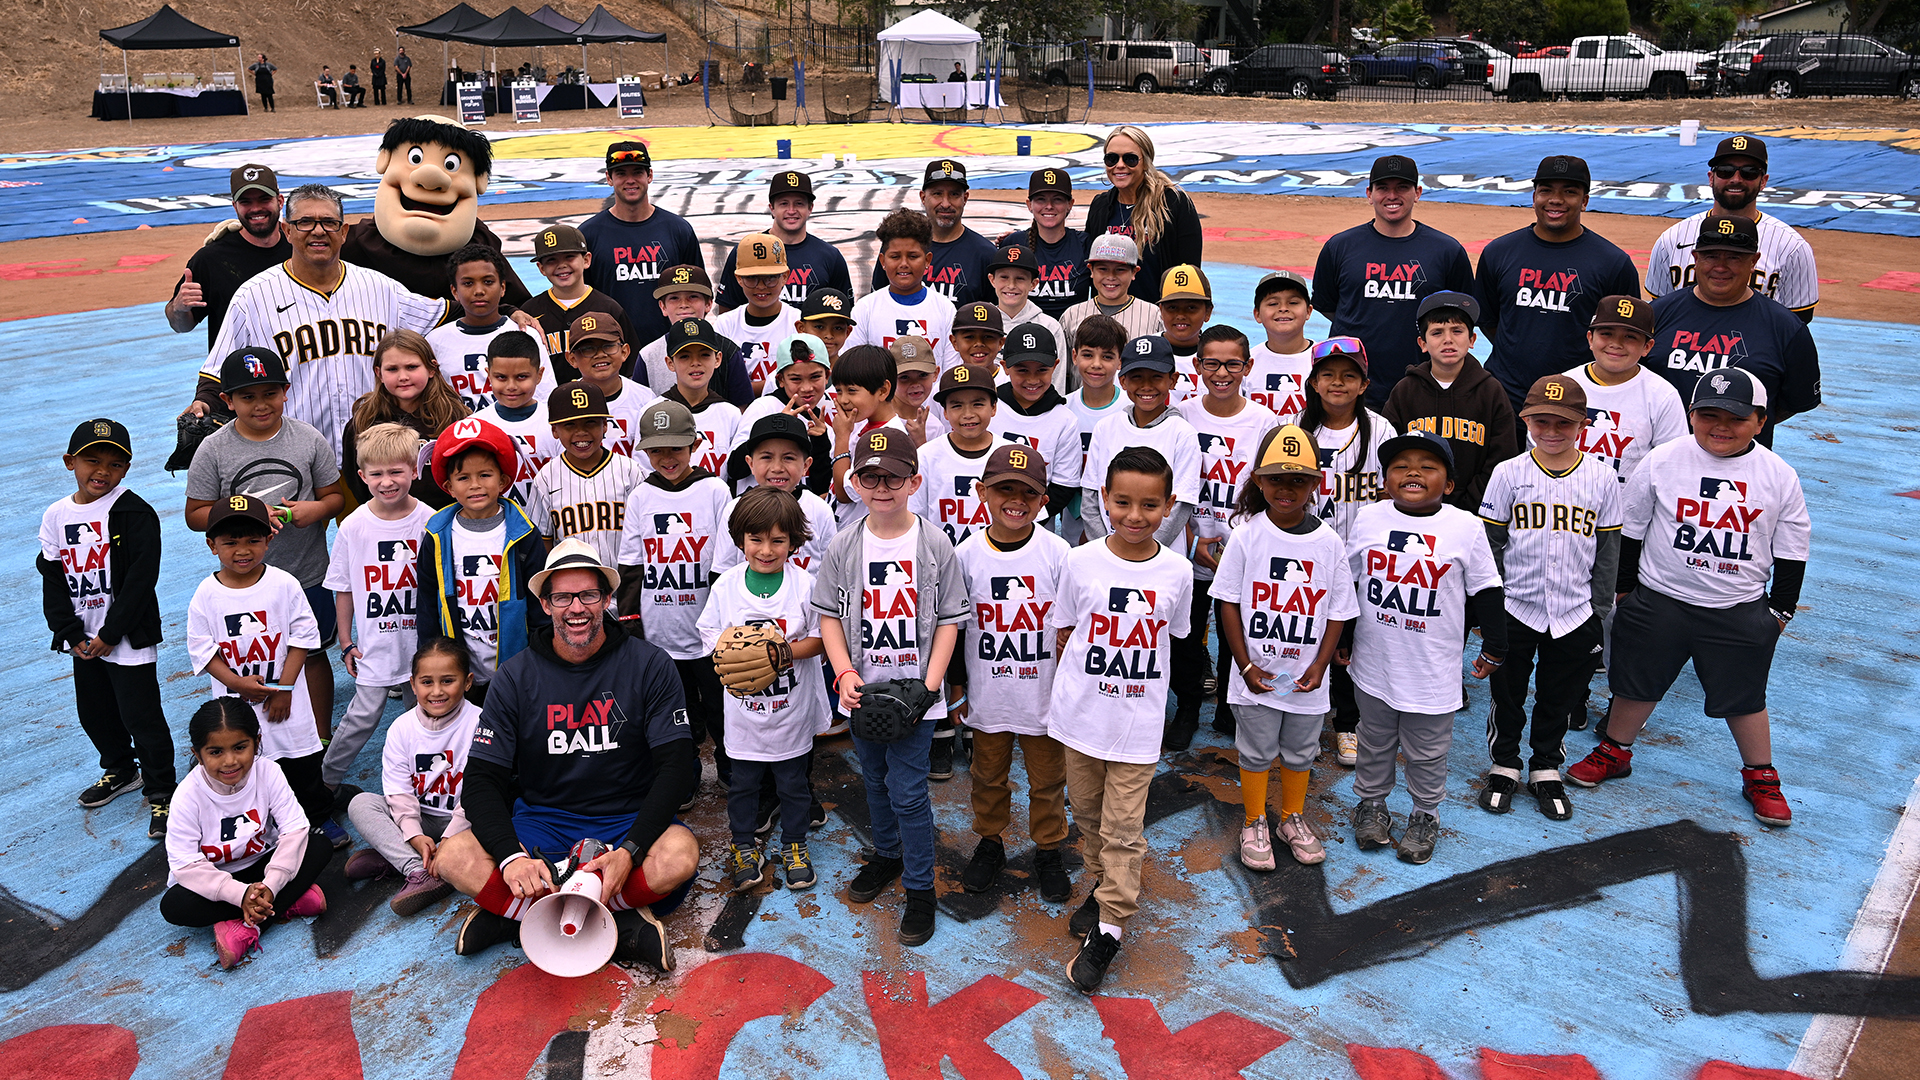 A group photo at an MLB Play Ball event